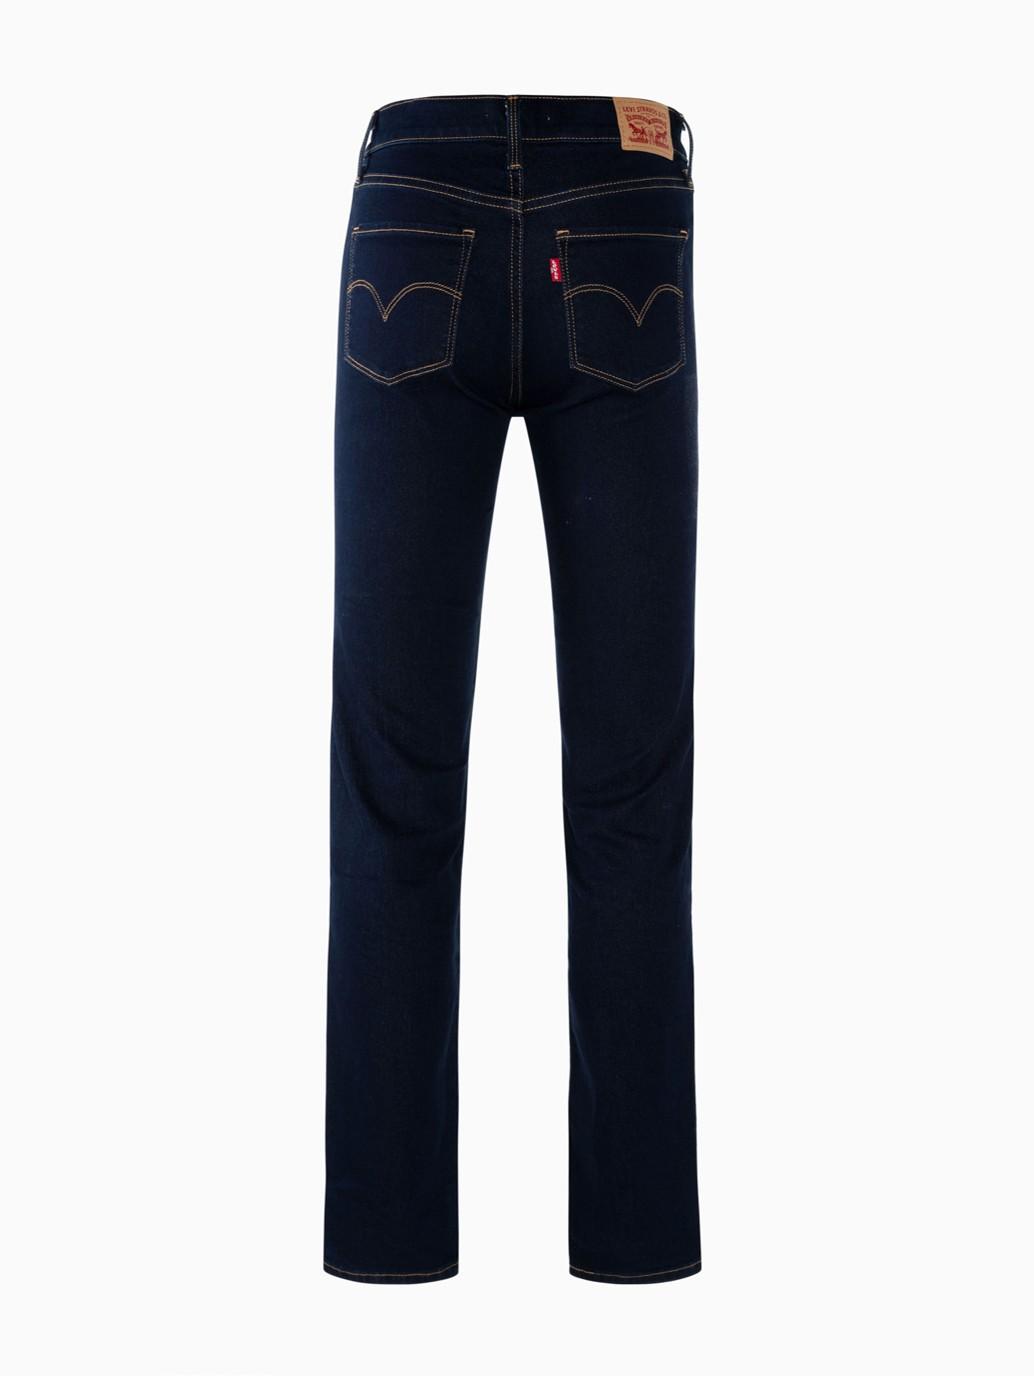 Buy 312 Shaping Slim Jeans | Levi’s® Official Online Store SG